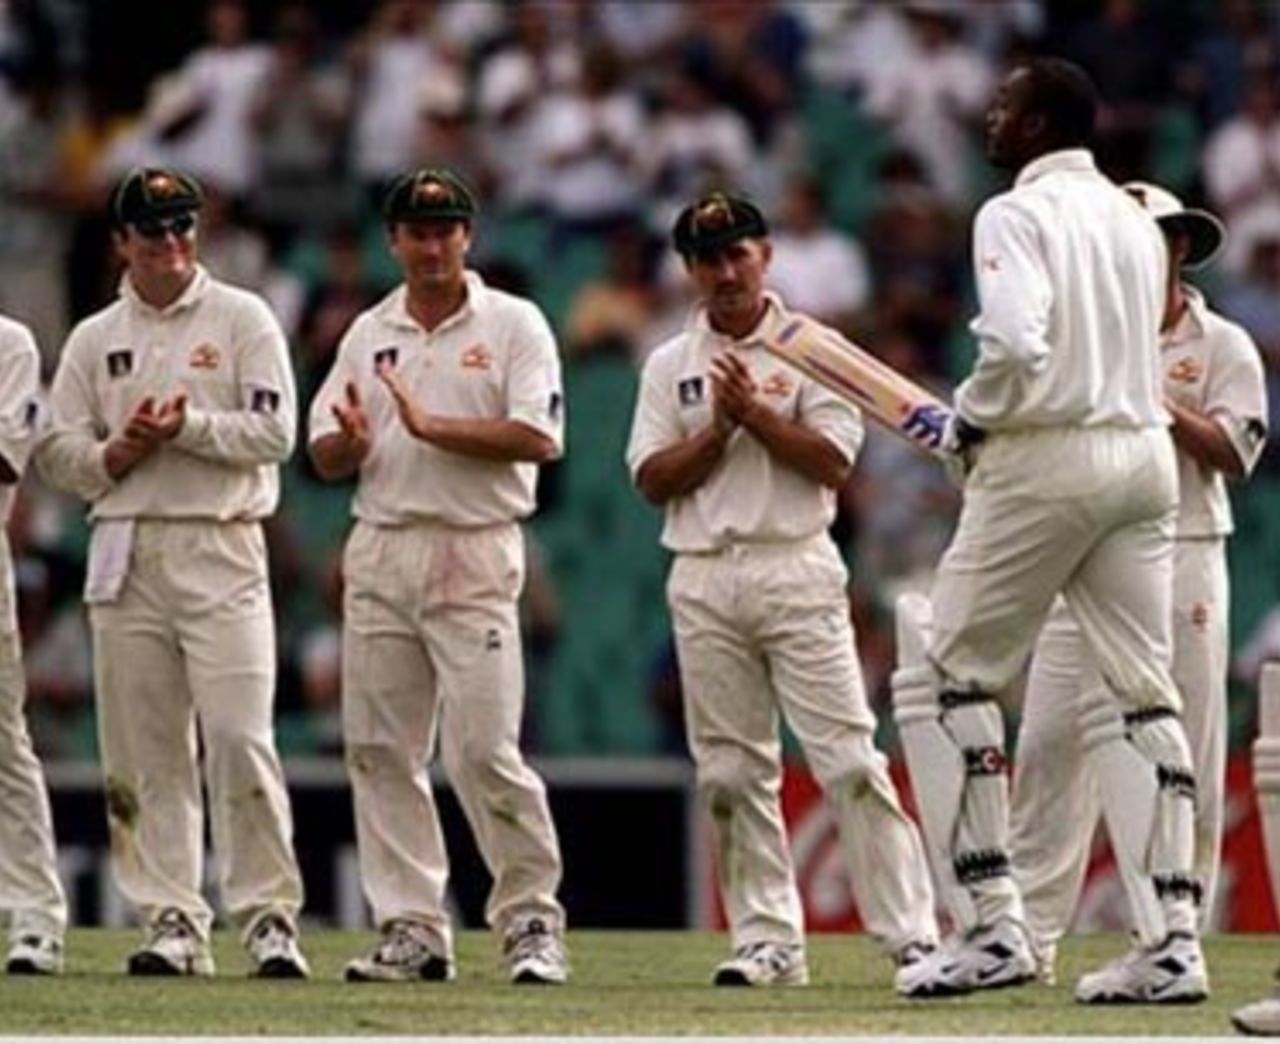 Australia v West Indies , 5th Test at the Sydney Cricket Ground, January 2001